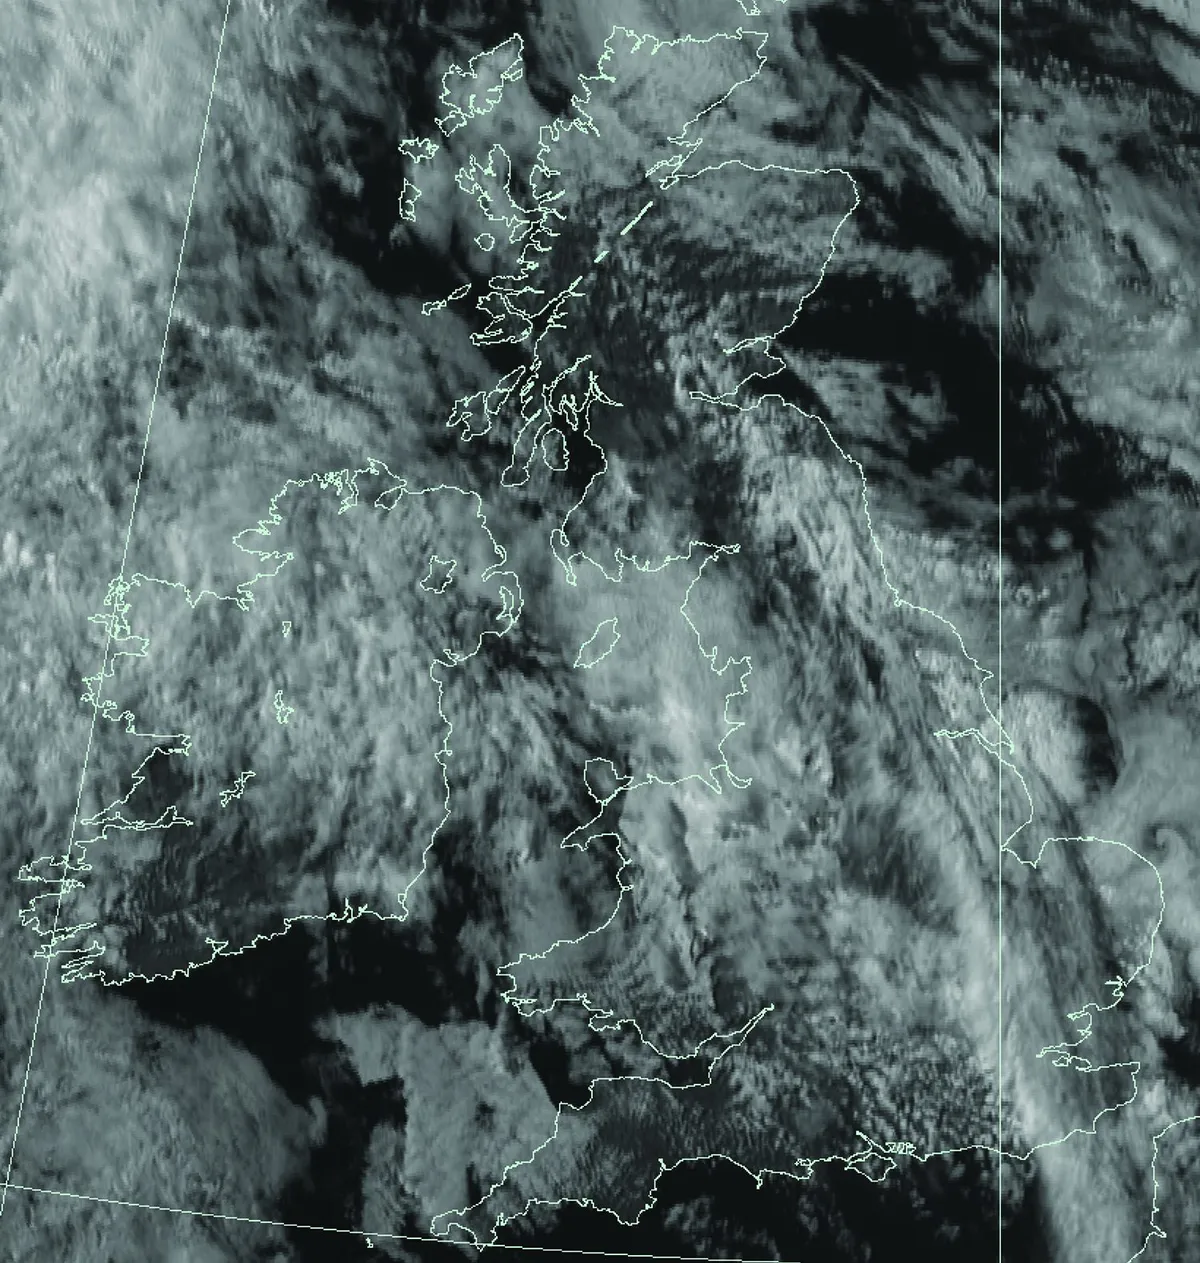 An astronomer’s nightmare: a Met Office infrared image showing clouds across the UK.